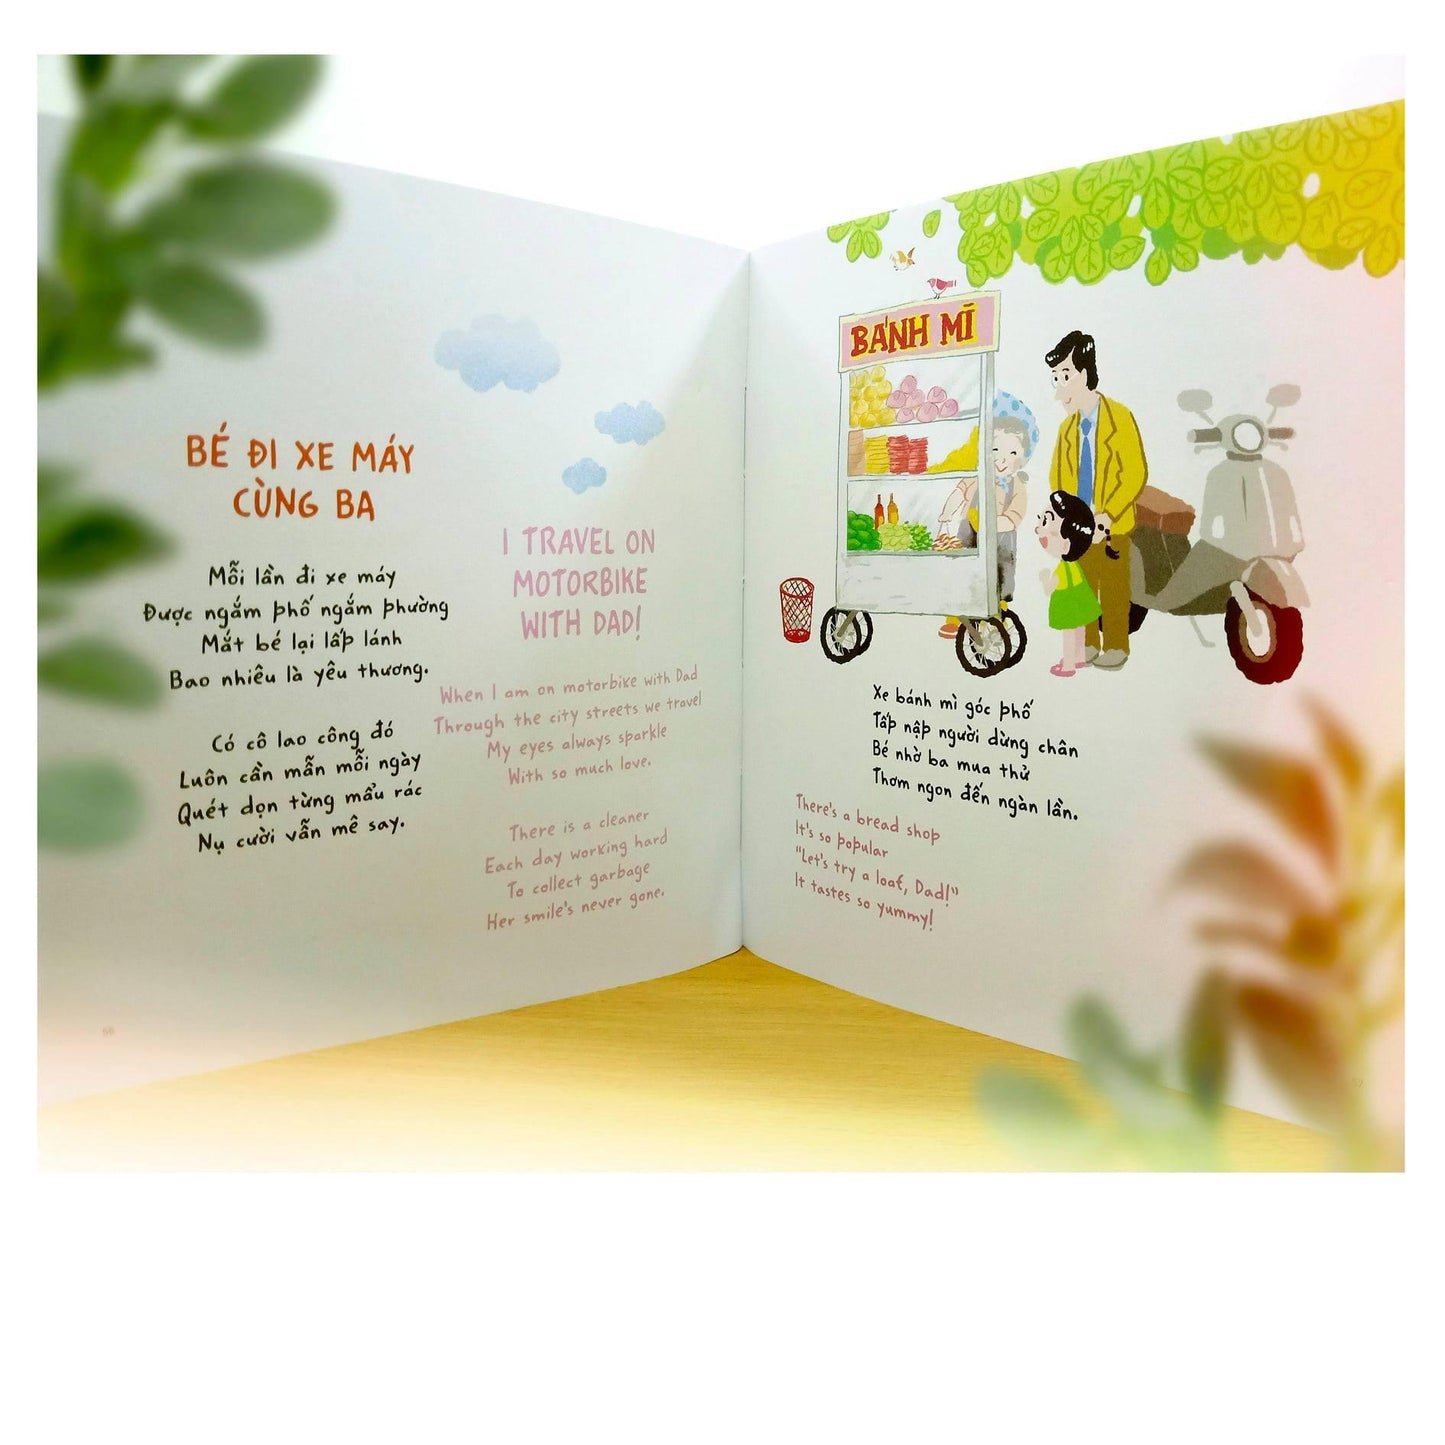 Những chiếc ghế trong căn bếp nhỏ [Chairs in small kitchen] Bilingual children poetry